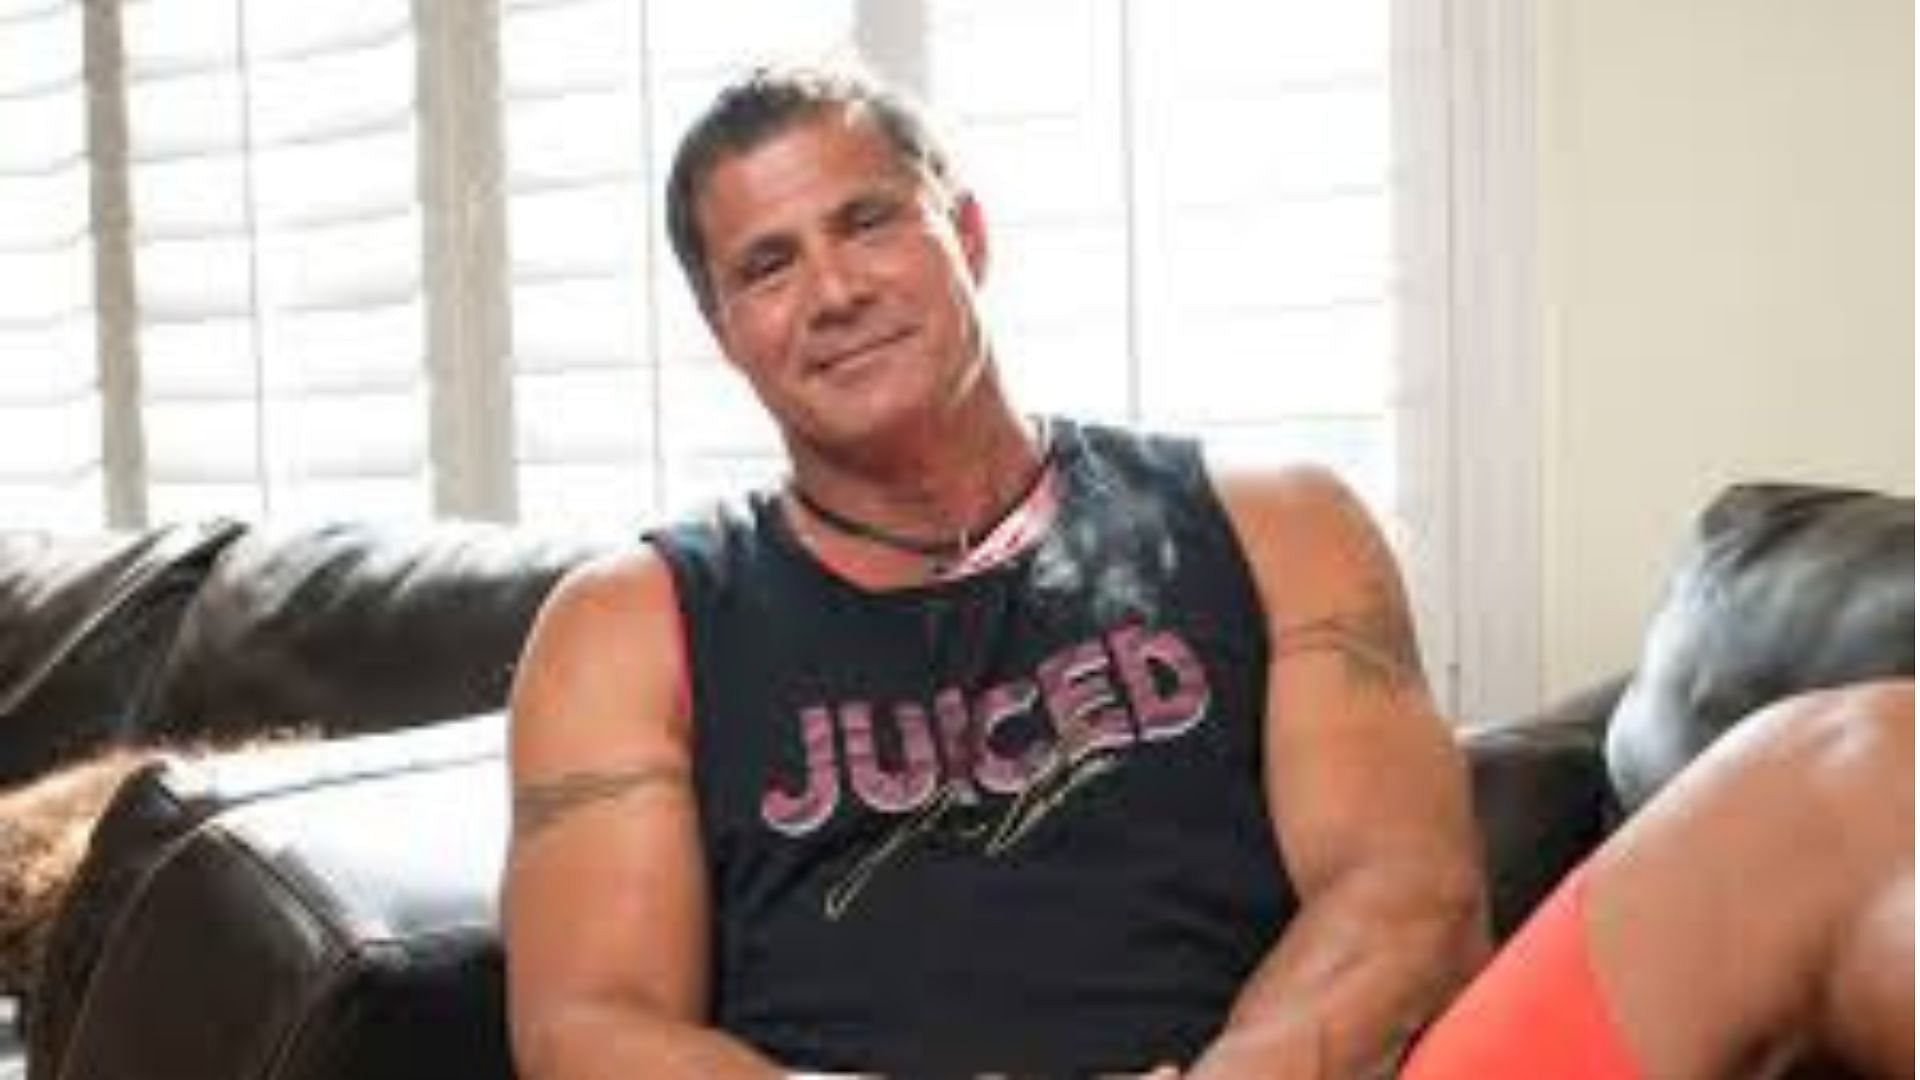 Jose Canseco, former MLB player